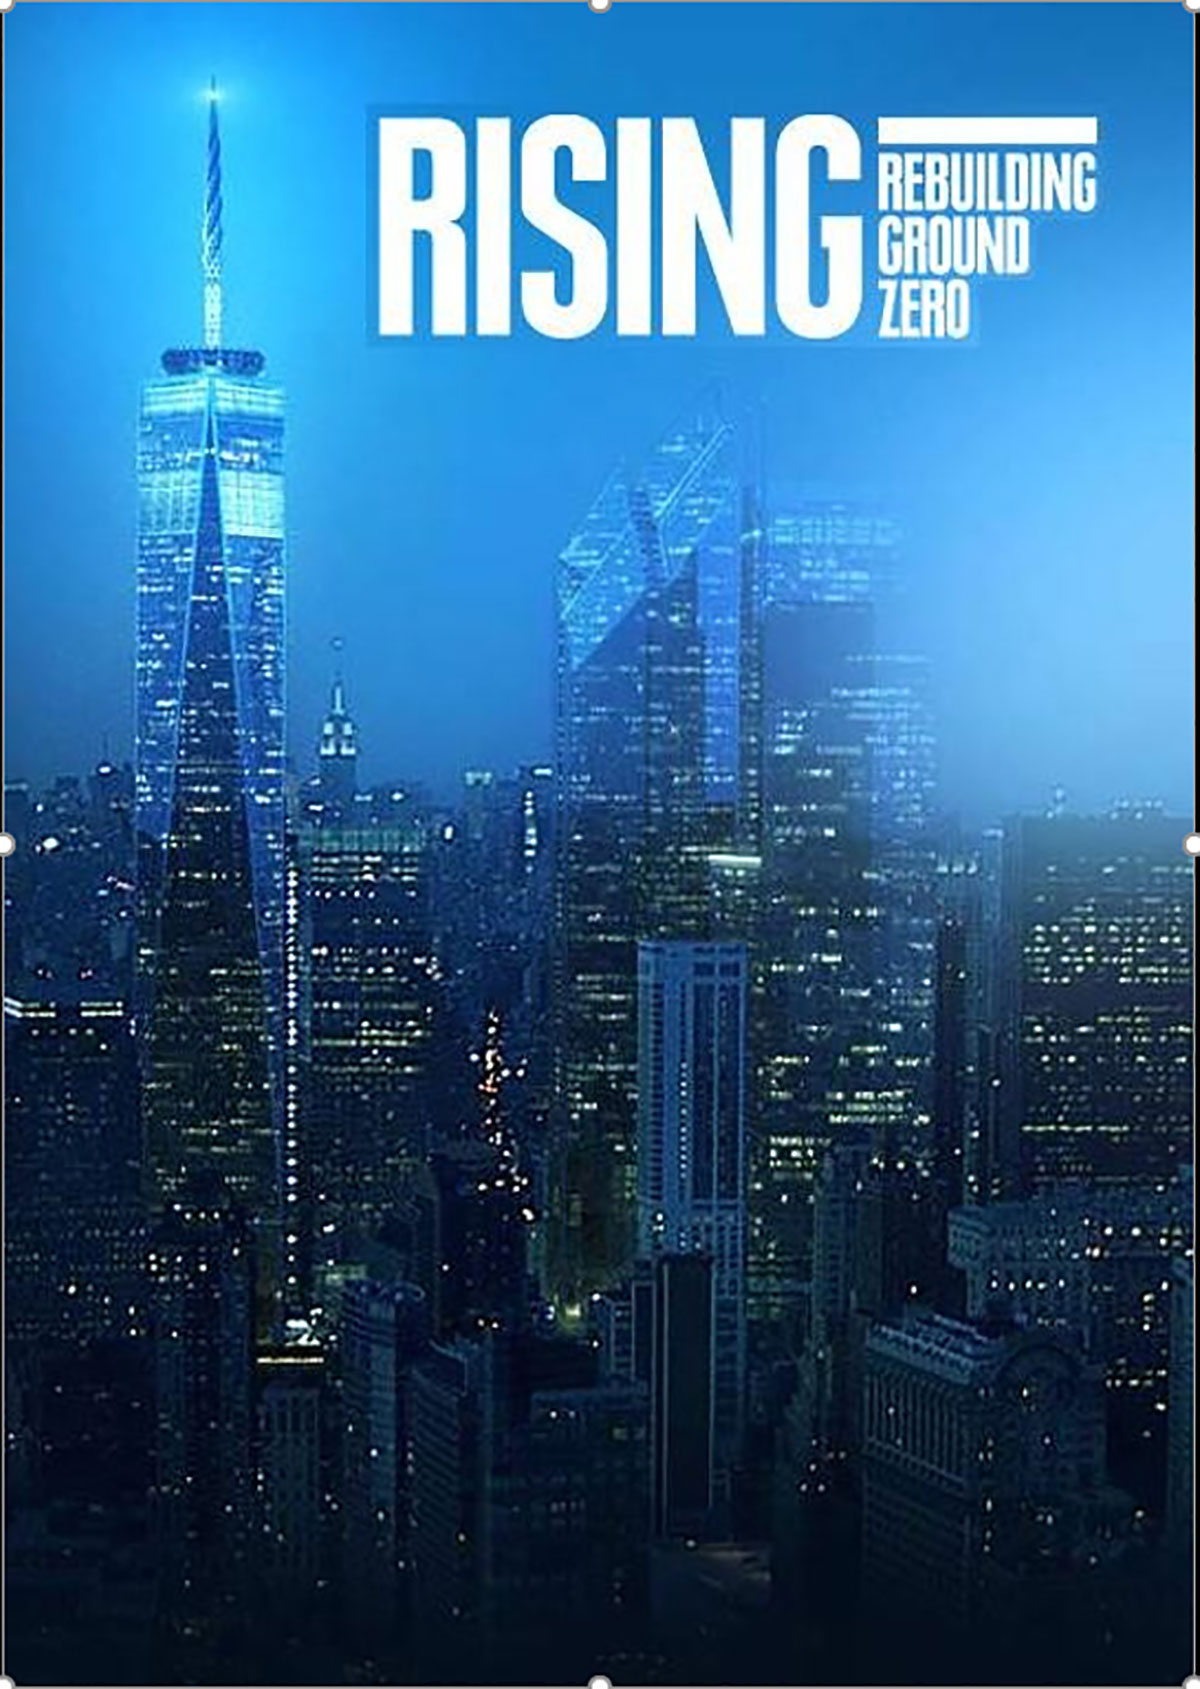 Poster for the Rising: Rebuilding Ground Zero documentary Co-produced by Danny Forster and Steven Spielberg about the rebuilding of the World Trade Center site in the wake of 9/11.